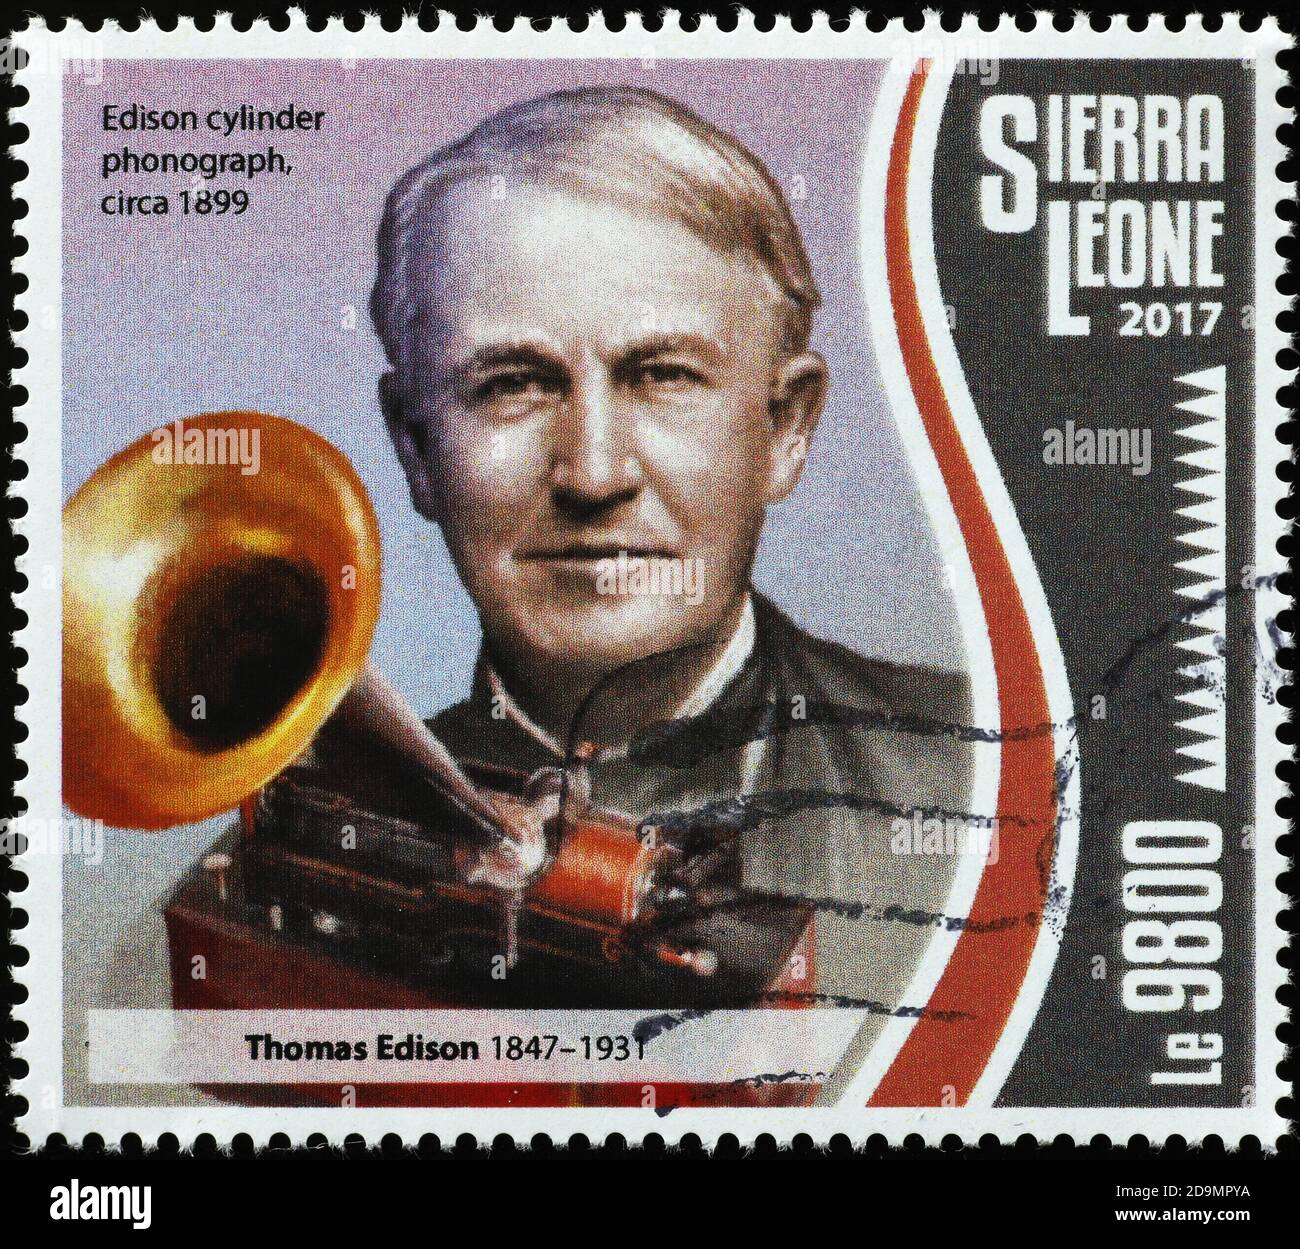 Cylinder phonograph invention by thomas Edison on stamp Stock Photo